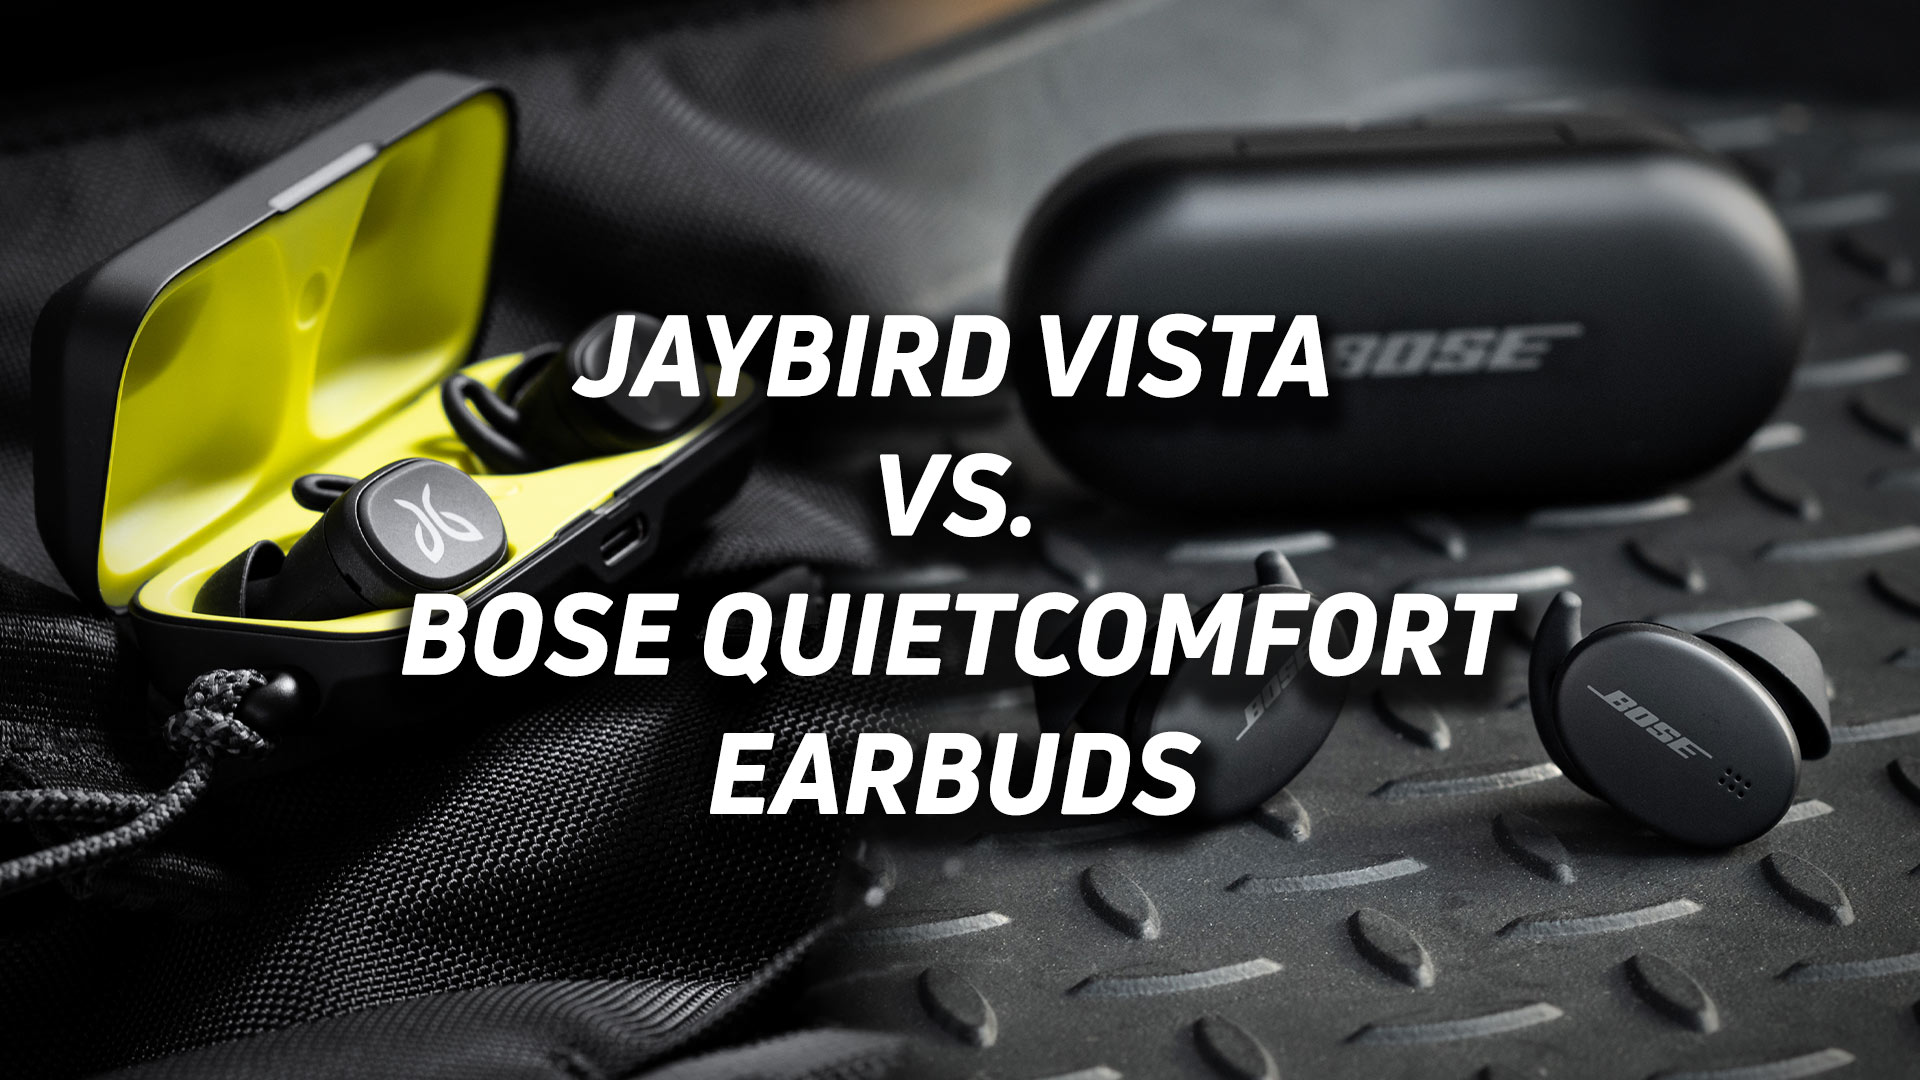 Images of the Jaybird Vista and Bose Sport Earbuds workout true wireless earbuds blended together with versus text overlaid atop the images.